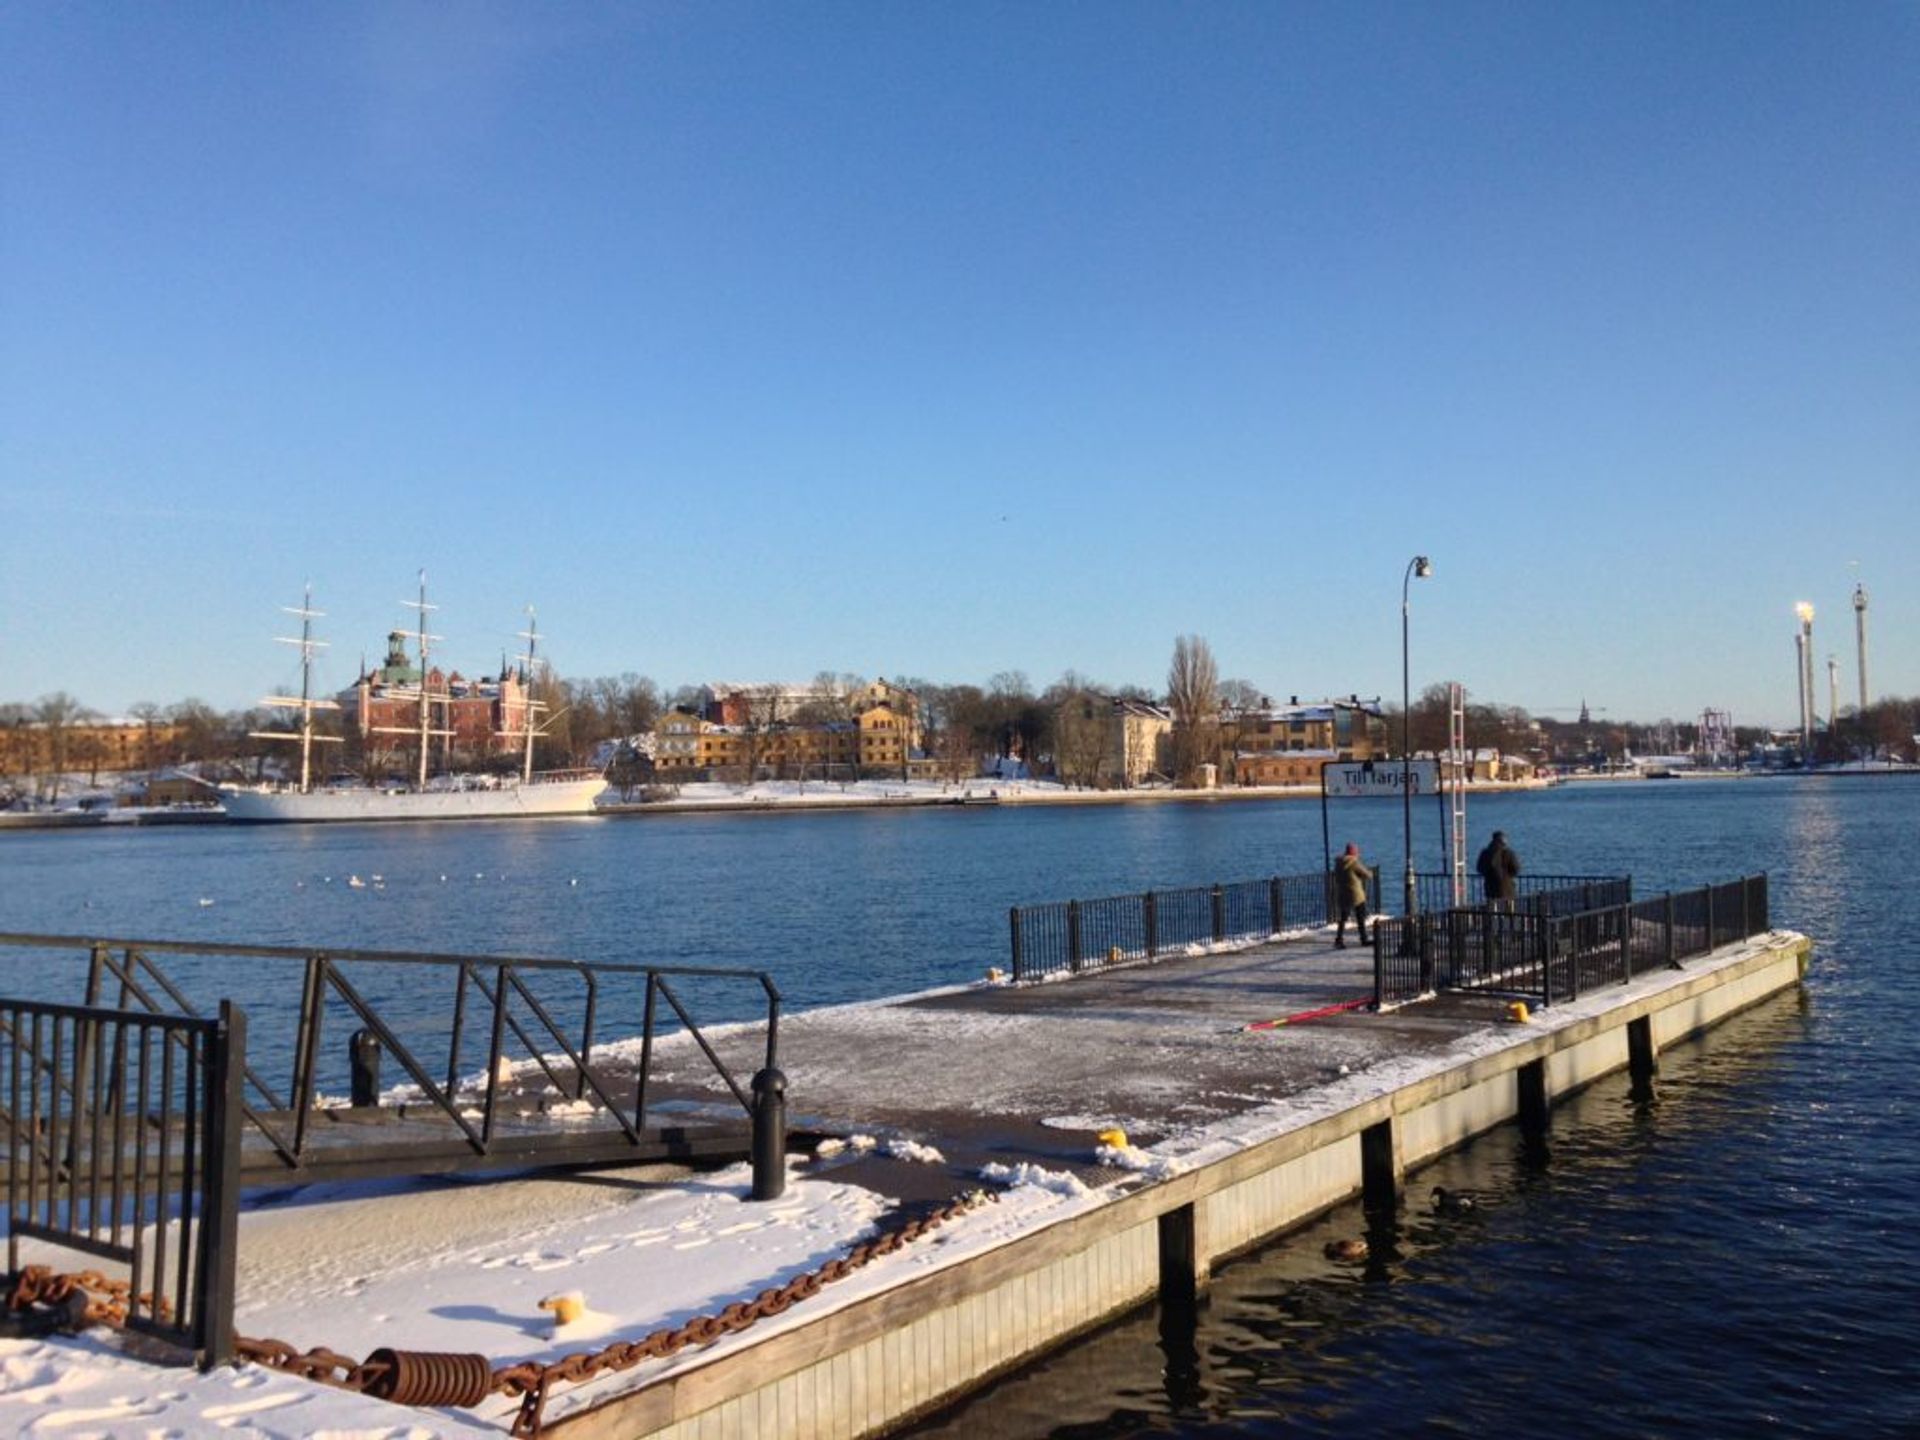 Stockholm water from Slussen ferry stop in January 2018